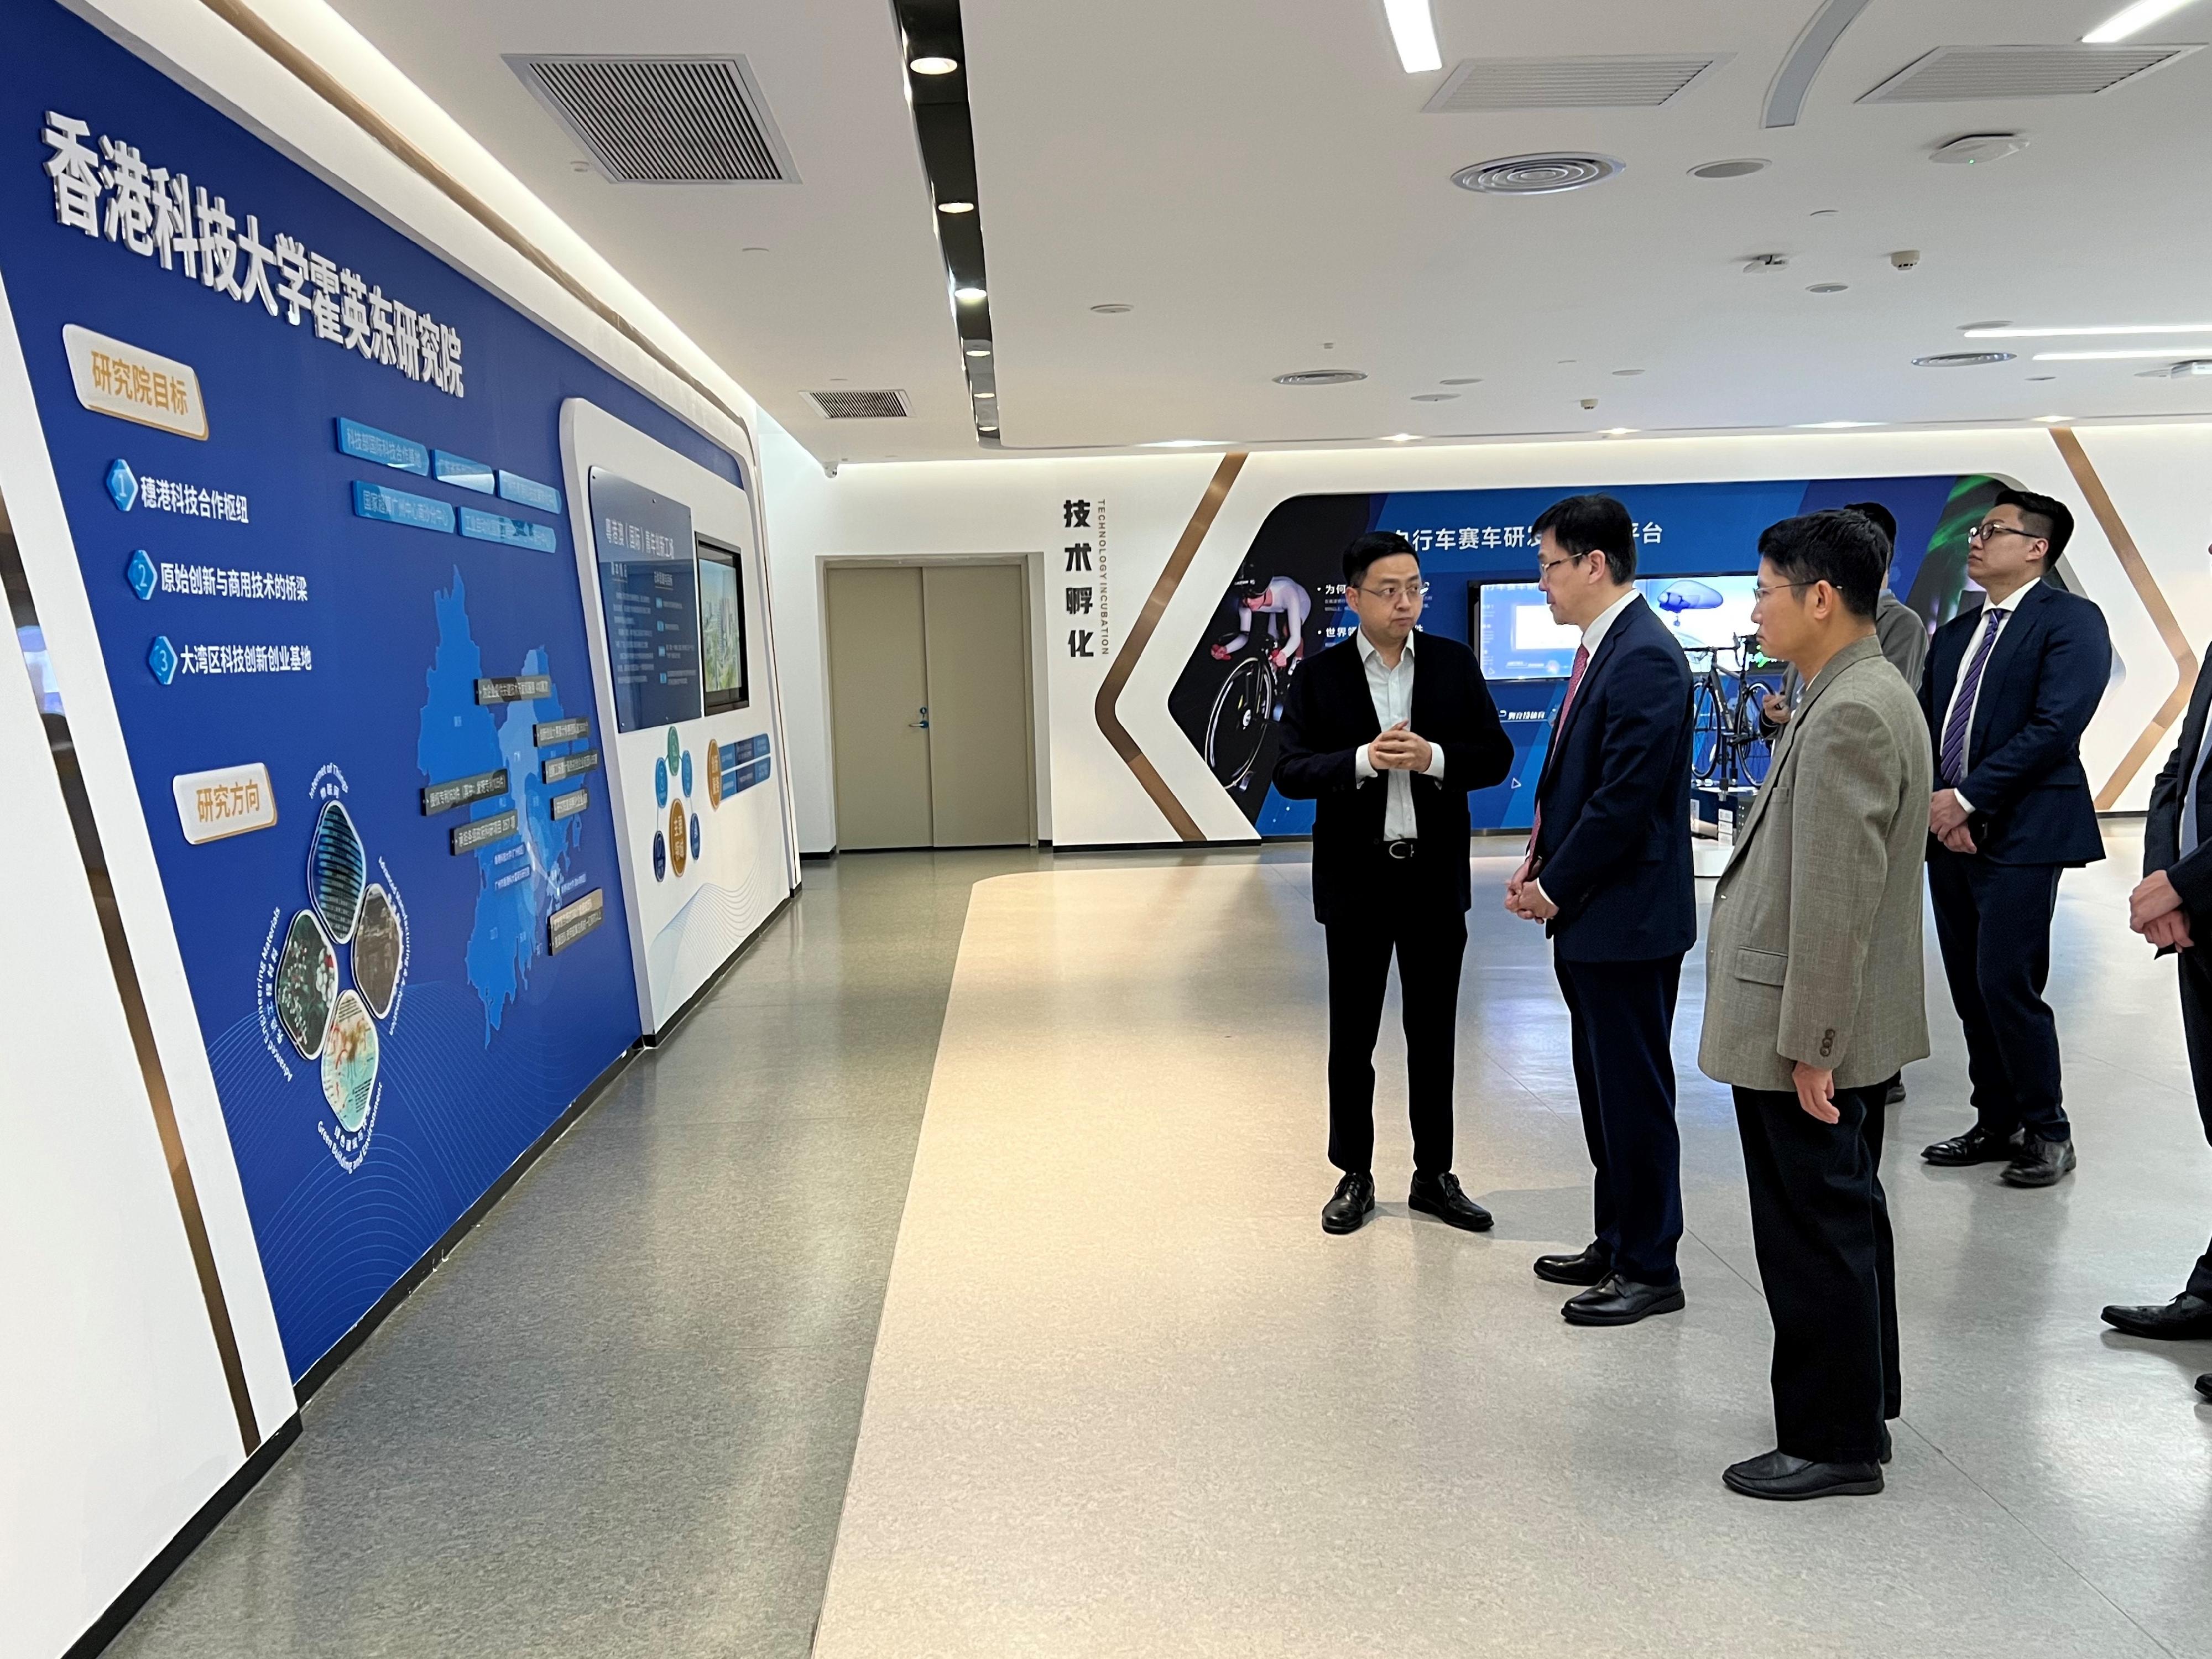 The Secretary for Innovation, Technology and Industry, Professor Sun Dong (second left), visits the Hong Kong University of Science and Technology Fok Ying Tung Research Institute in Guangzhou today (March 31) to study the Guangzhou-Hong Kong innovation and technology co-operation.